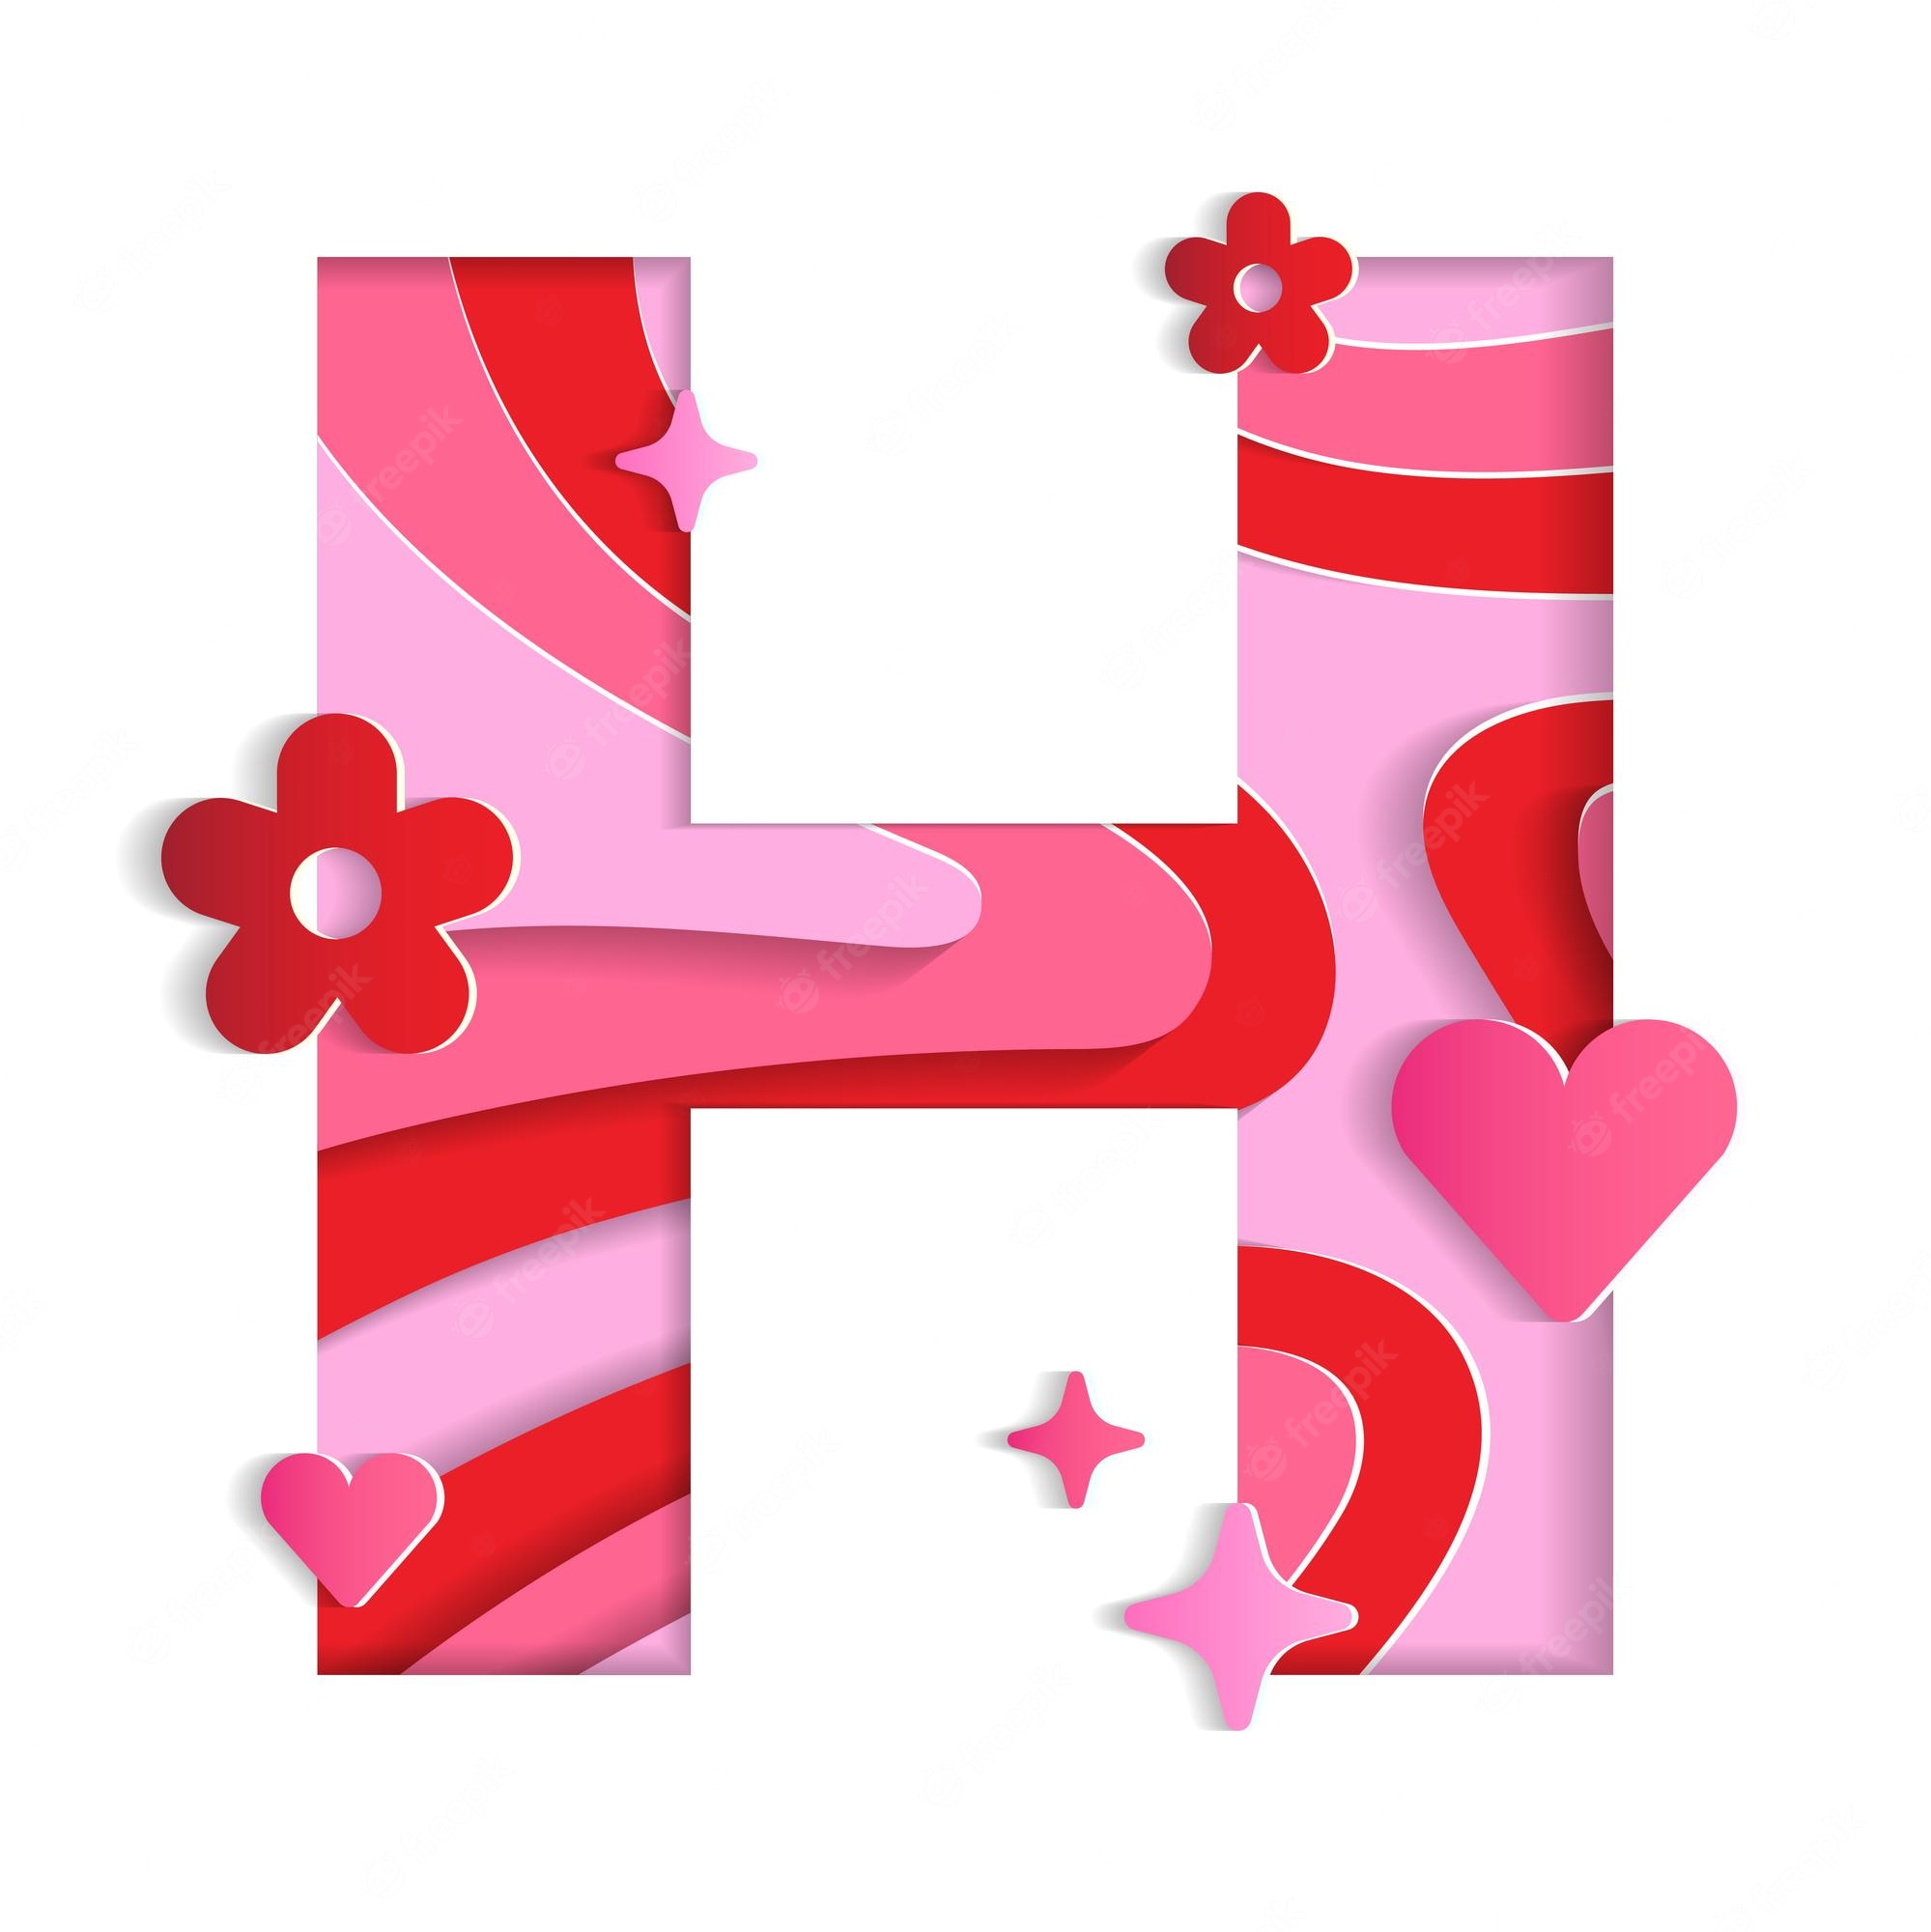 h alphabet valentines day love character font letter paper flower heart 3d layer paper cutout card 307151 947